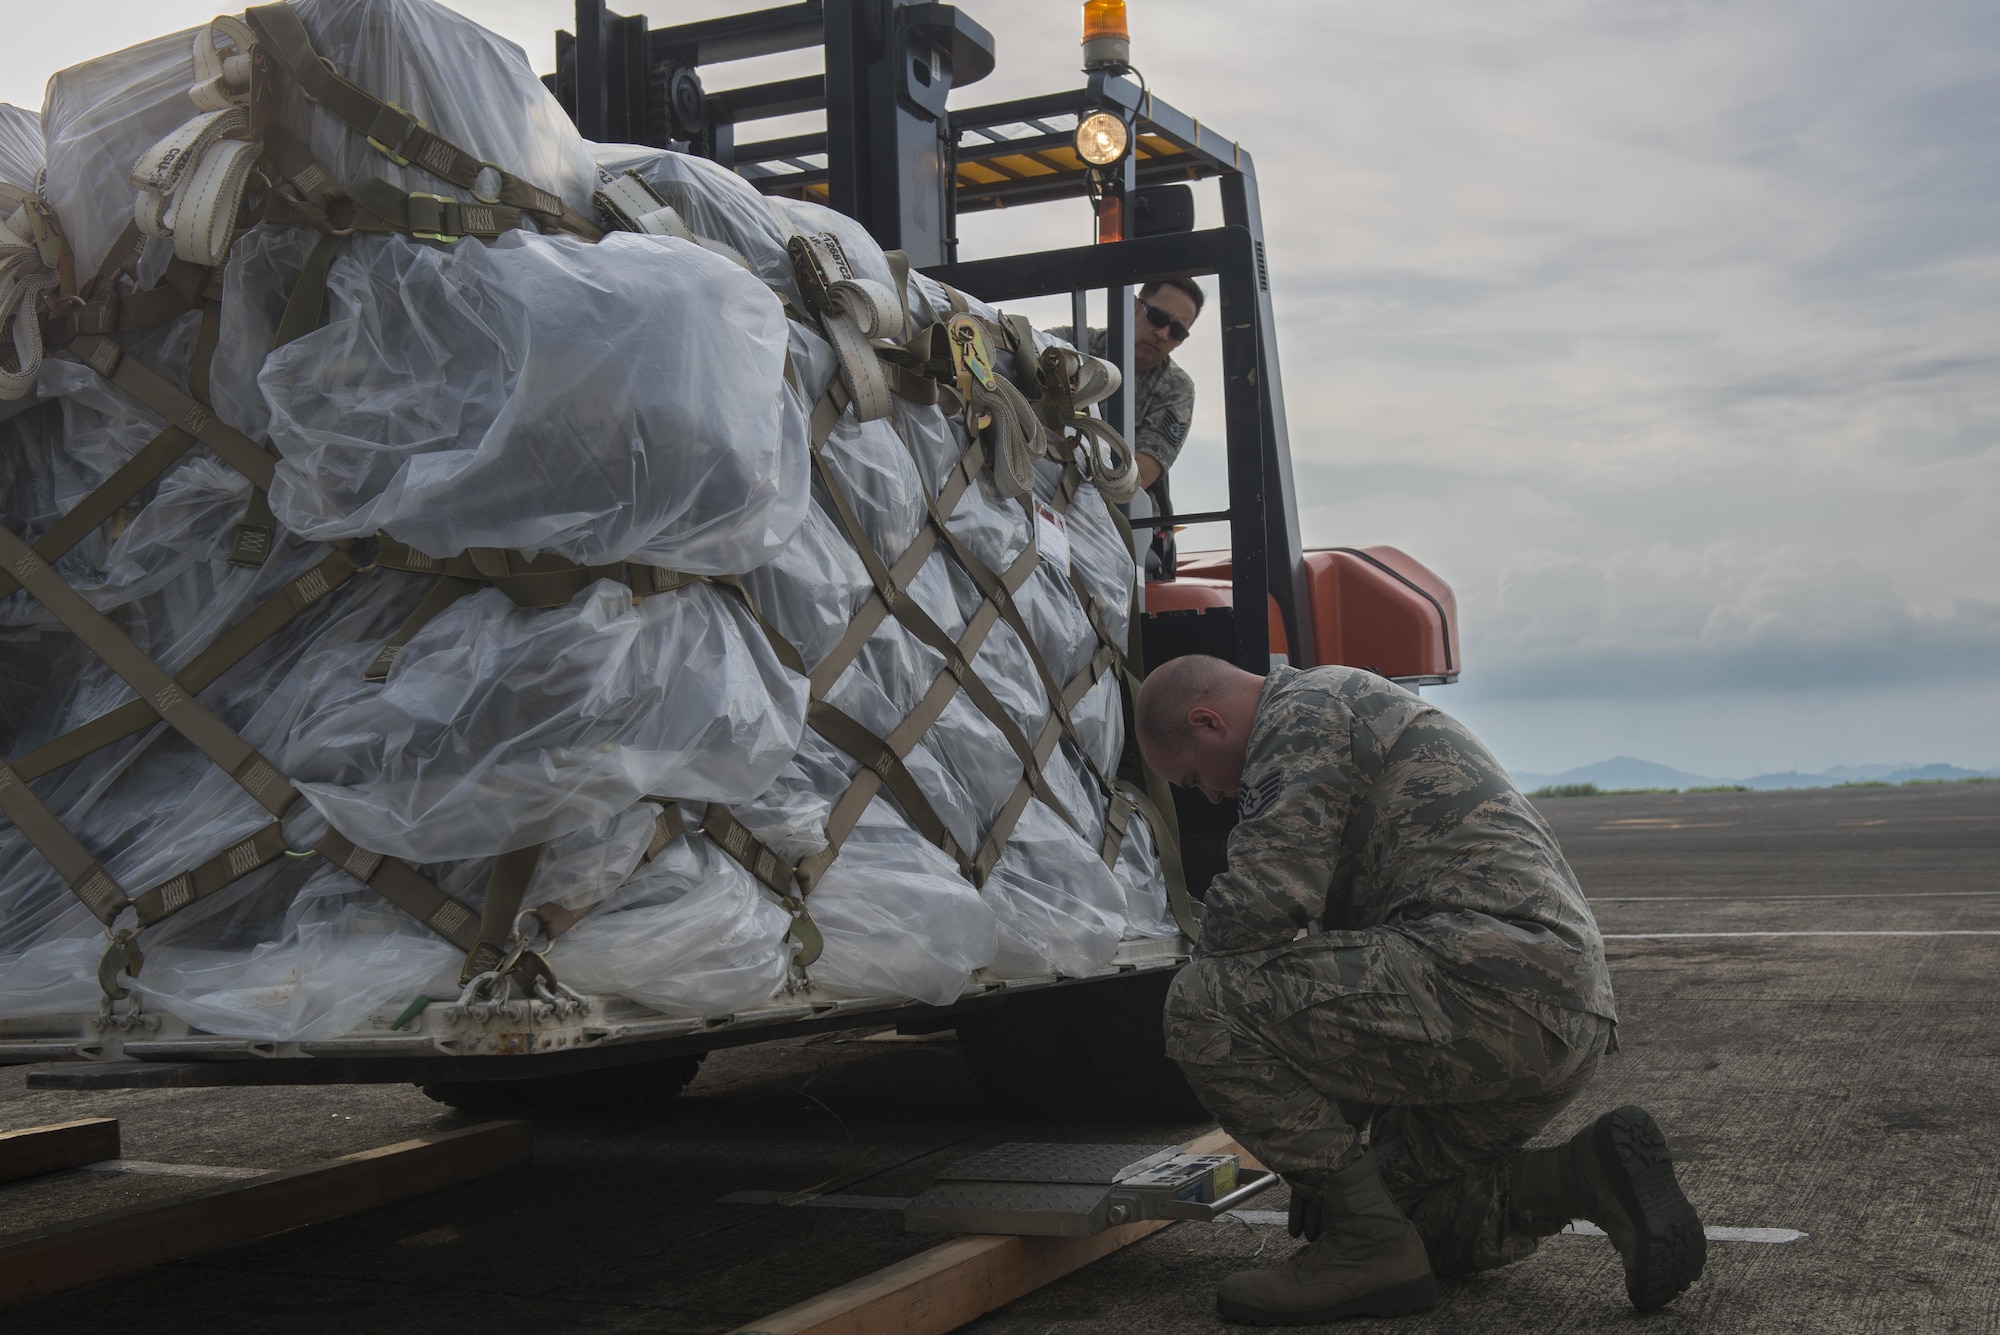 From left, Tech. Sgt. Phillip Eyer, 374th Logistics and Readiness Squadron joint inspector, and Staff Sgt. Brandon Inhat, 374 LRS flight combat mobility operations technician, inspect a cargo pallet during Yokota Air Base’s first C-130J Super Hercules operational mission, June 30, 2017, at Manila, Philippines. The mission highlighted Yokota’s C-130J increased airlift capabilities. (U.S. Air Force photo by Airman 1st Class Juan Torres)